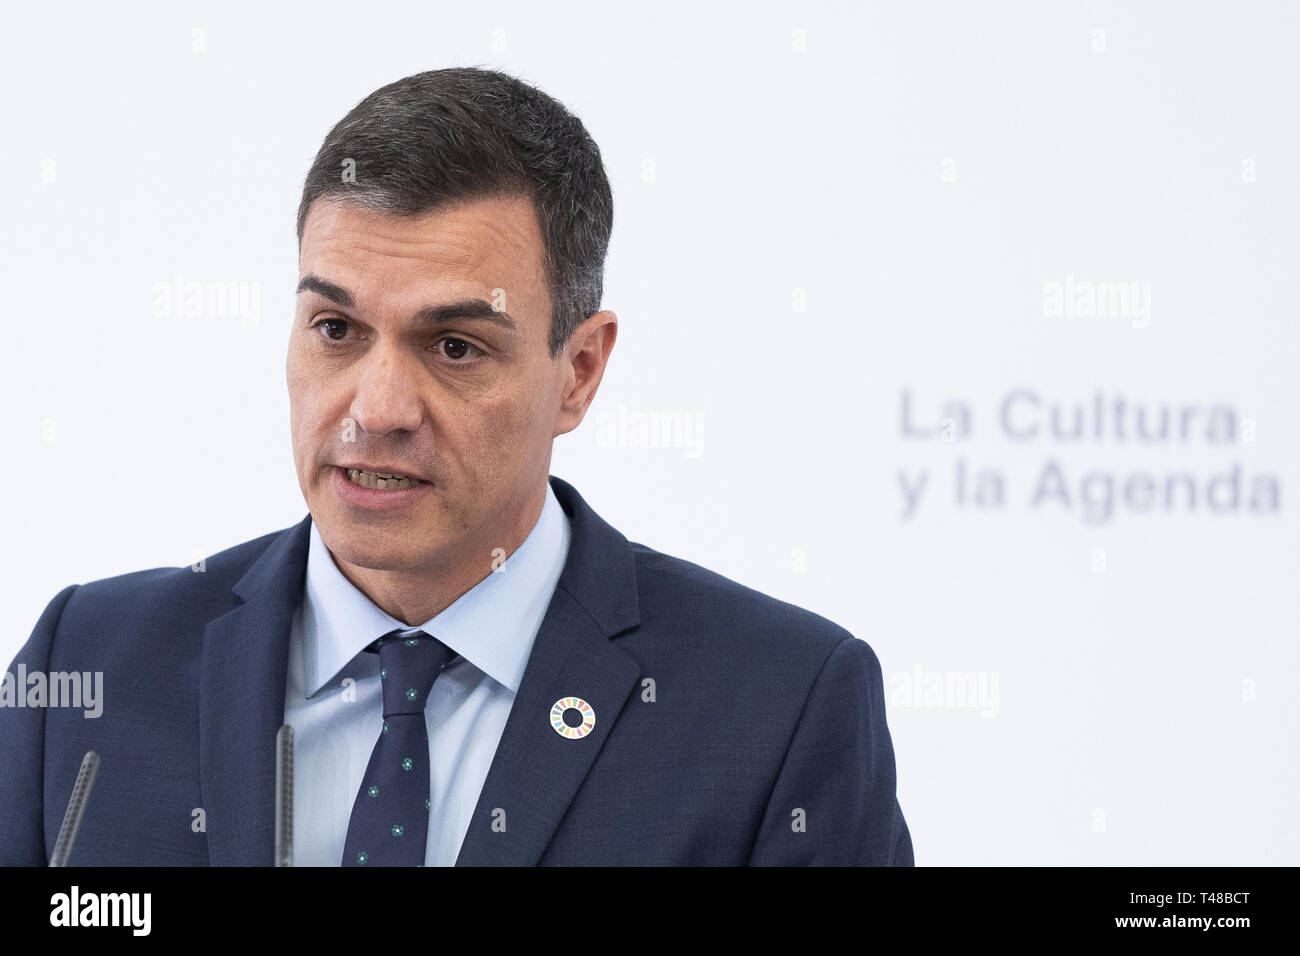 The President of the Spanish Government Pedro Sanchez presides the meeting  ''La Cultura y la Agenda 2030''at the Moncloa Palace in Madrid Featuring: Pedro  Sanchez Where: Madrid, Spain When: 14 Mar 2019